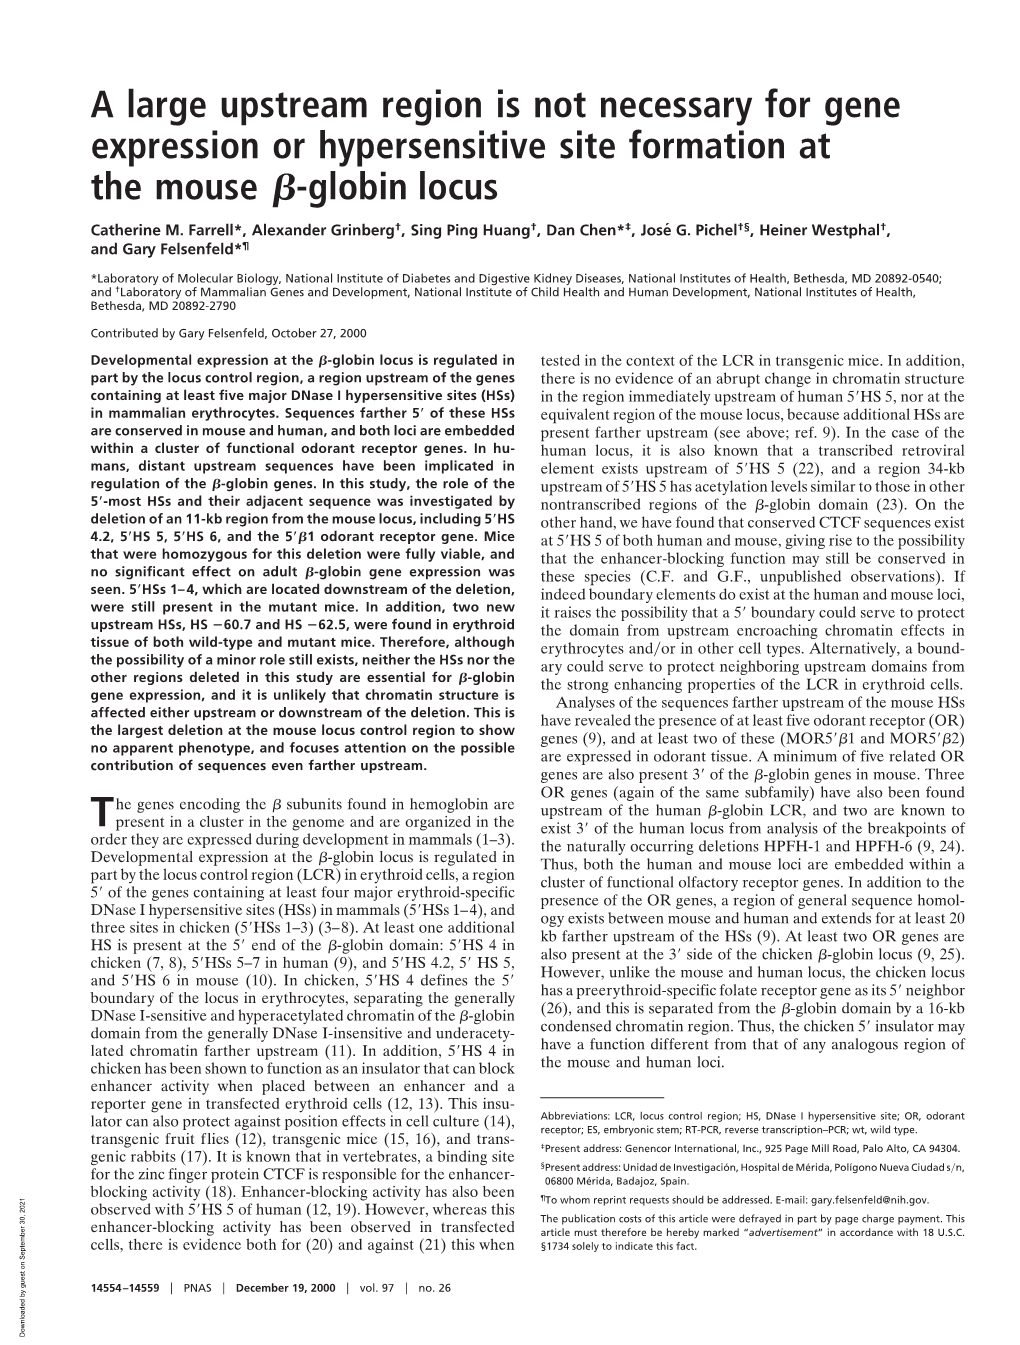 A Large Upstream Region Is Not Necessary for Gene Expression Or Hypersensitive Site Formation at the Mouse ␤-Globin Locus